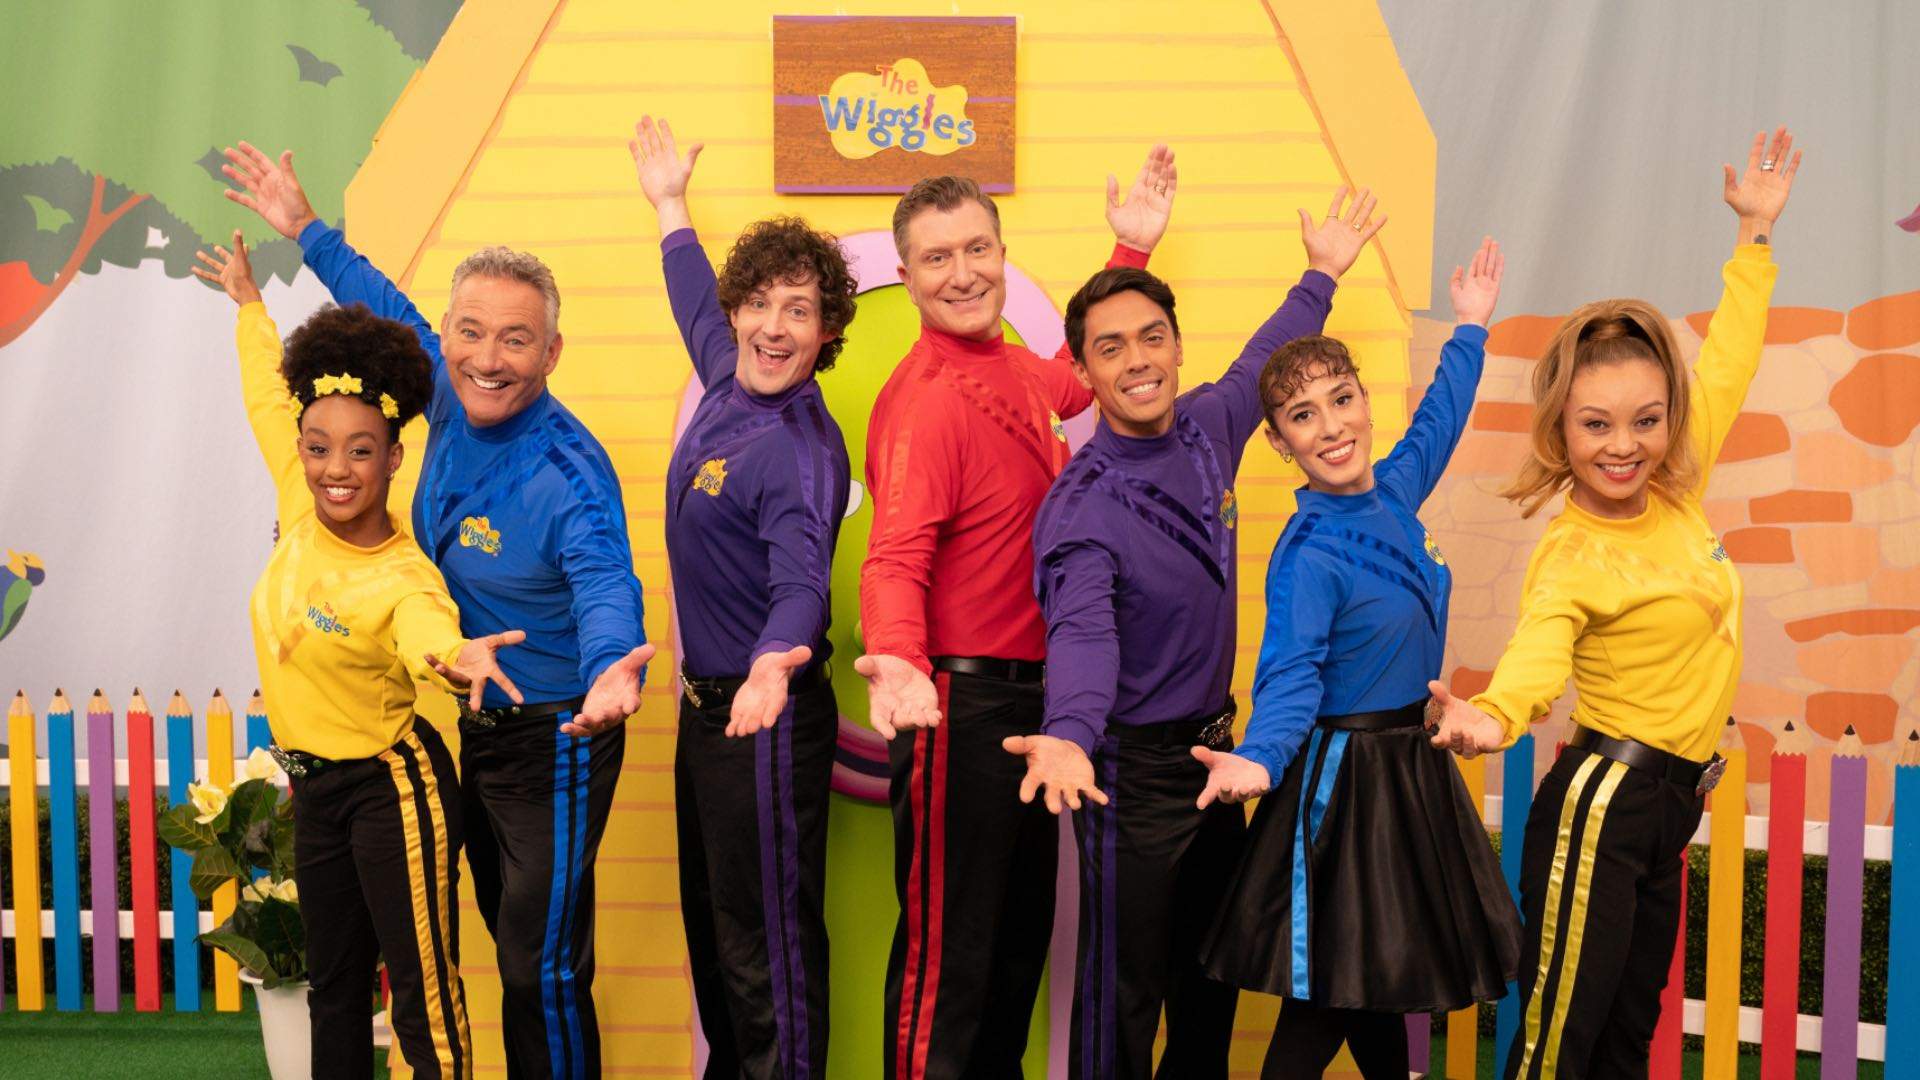 Hottest 100 Victors and Noted Rainbow Aficionados The Wiggles Will Perform at the Mardi Gras Parade